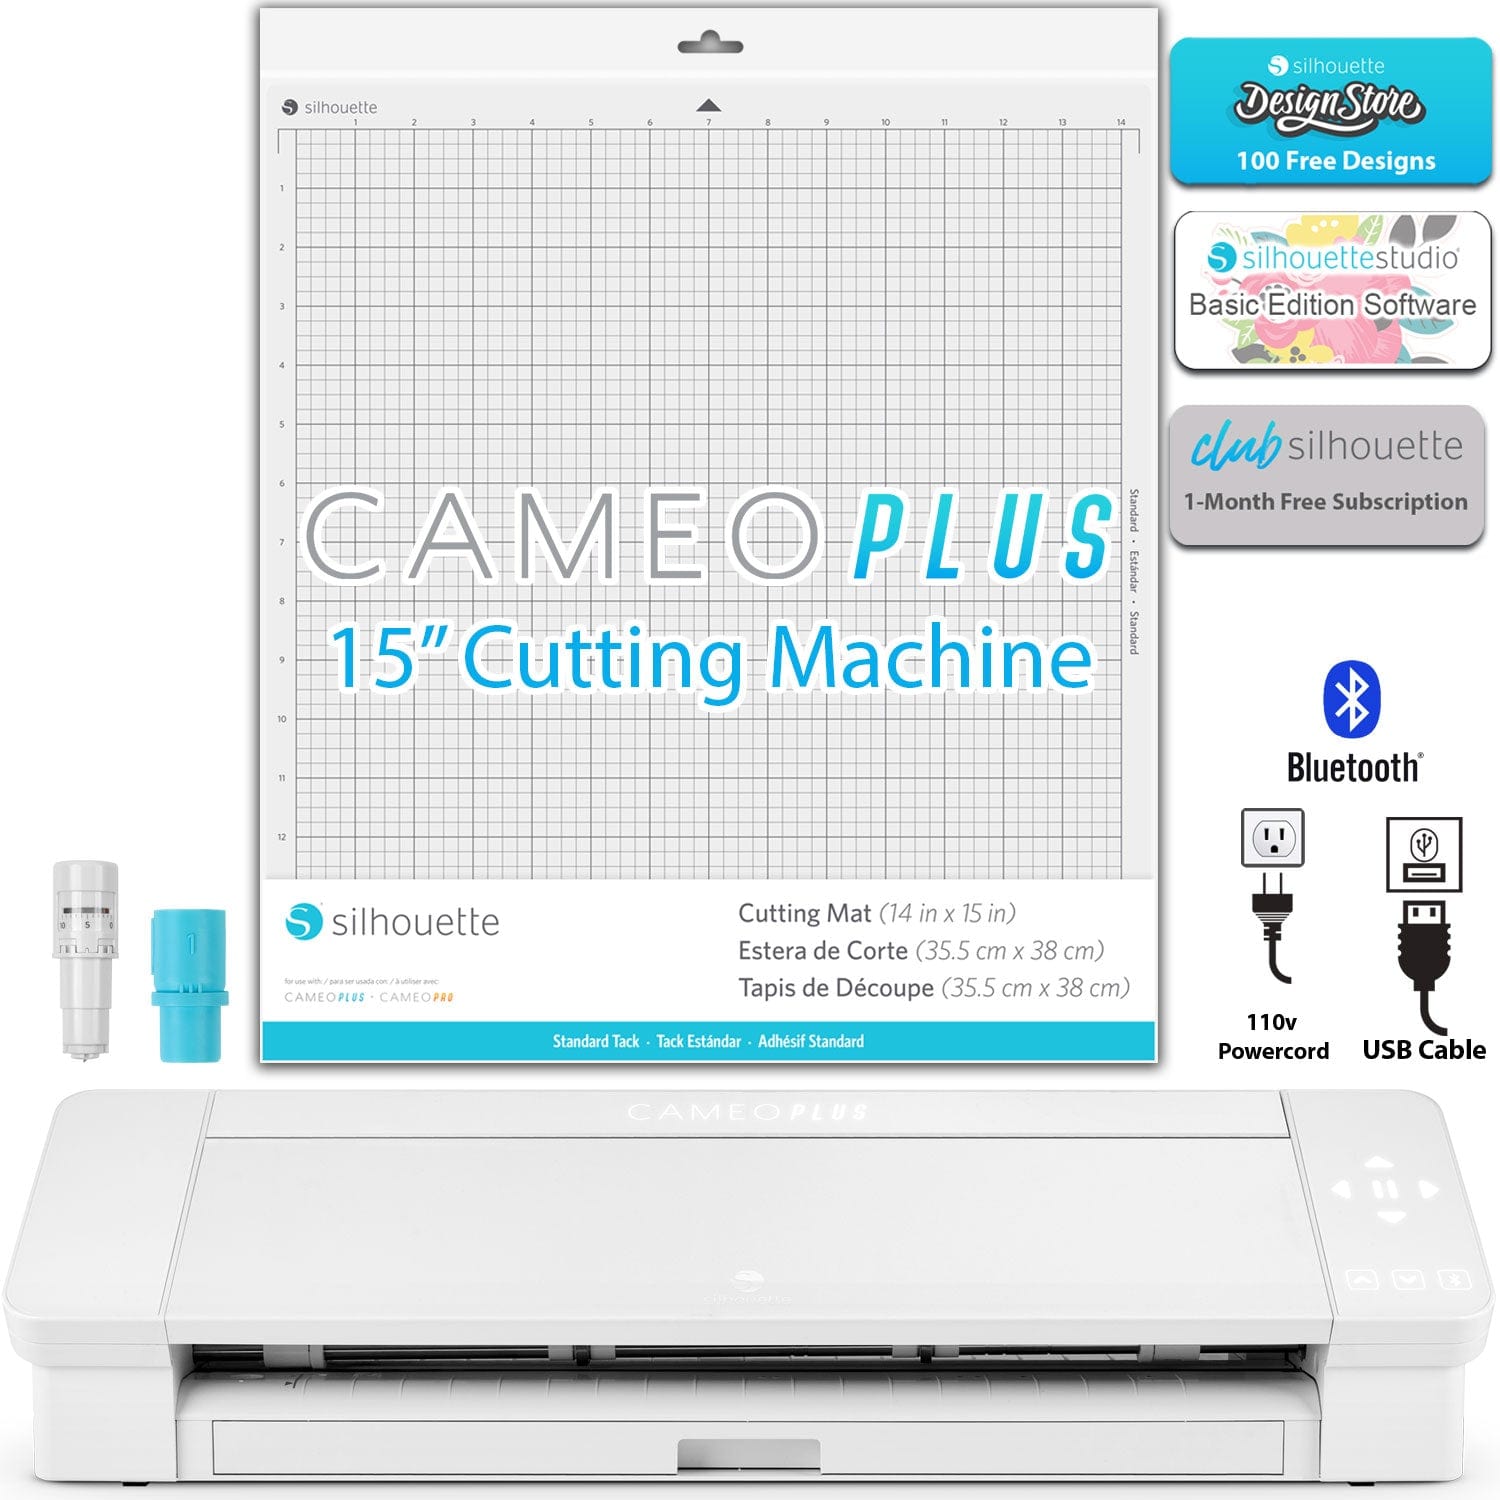 Silhouette Cameo 4 Plus Bundle with 2 Autoblades, 3 Different Cutting Mats, CC Vinyl Tool Kit, 100 Designs, and Access to Ebooks, Classes and More